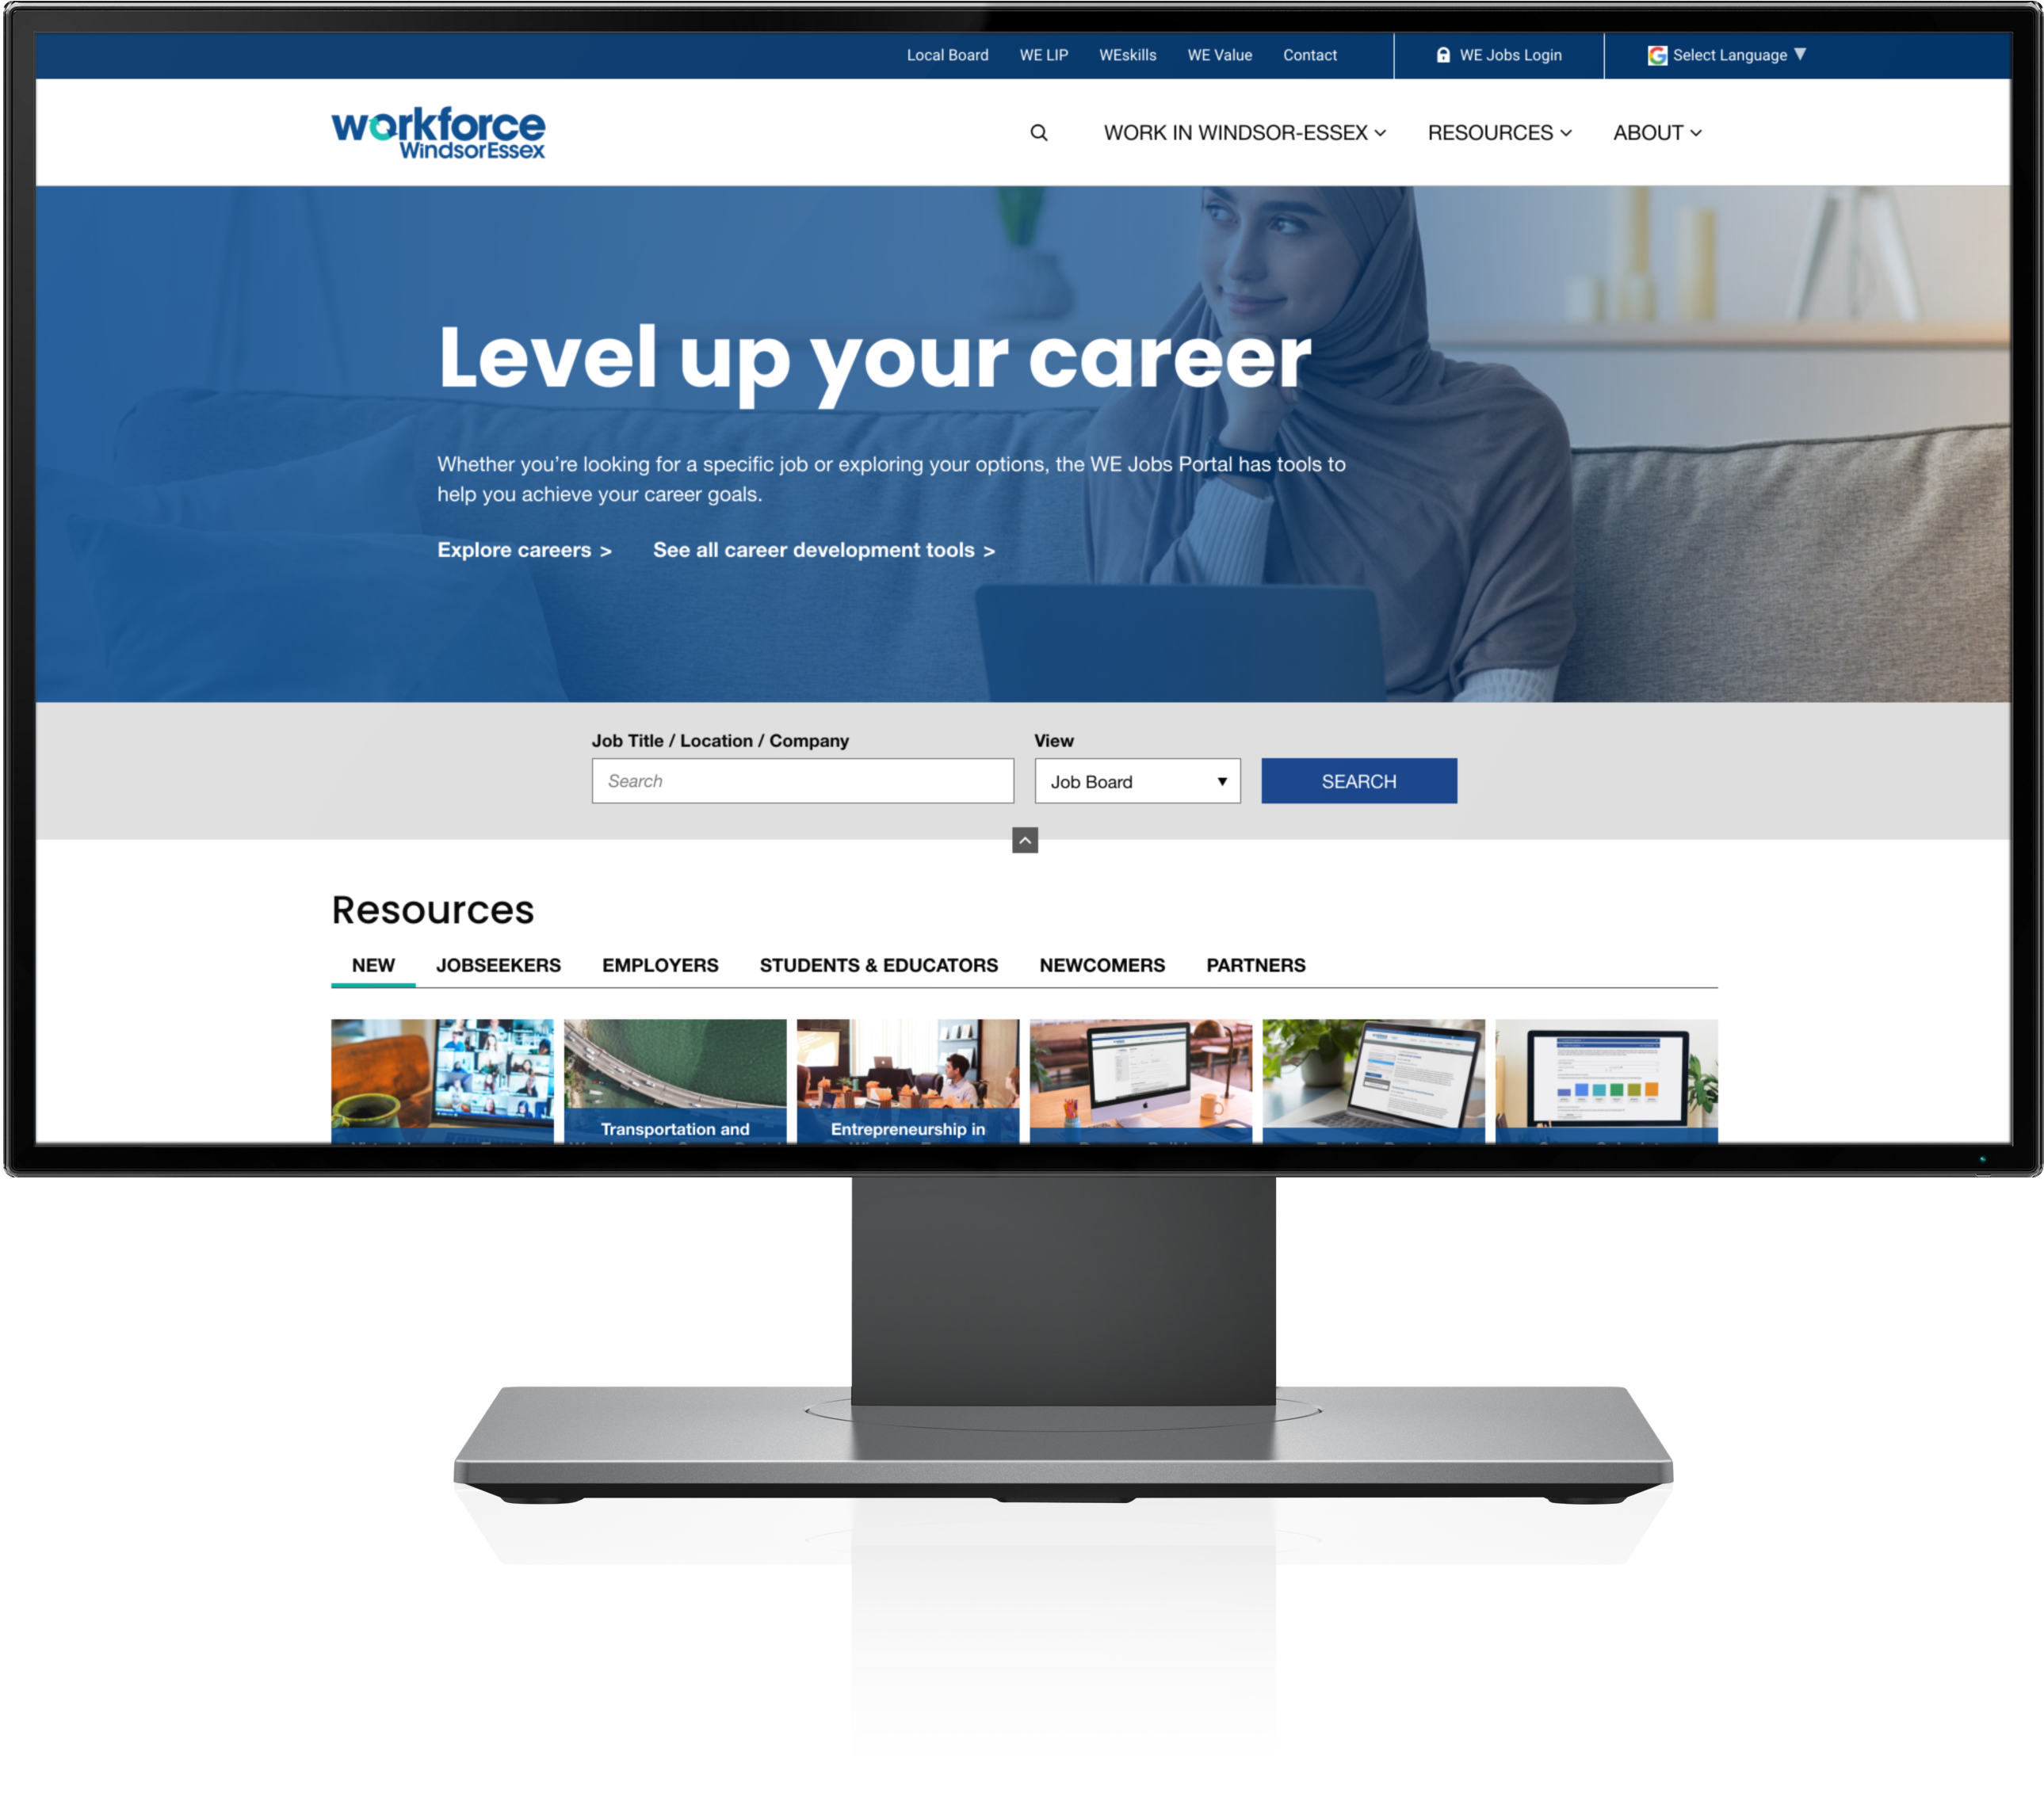 Computer monitor displaying the UX optimizations implemented on the Workforce WindsorEssex website.